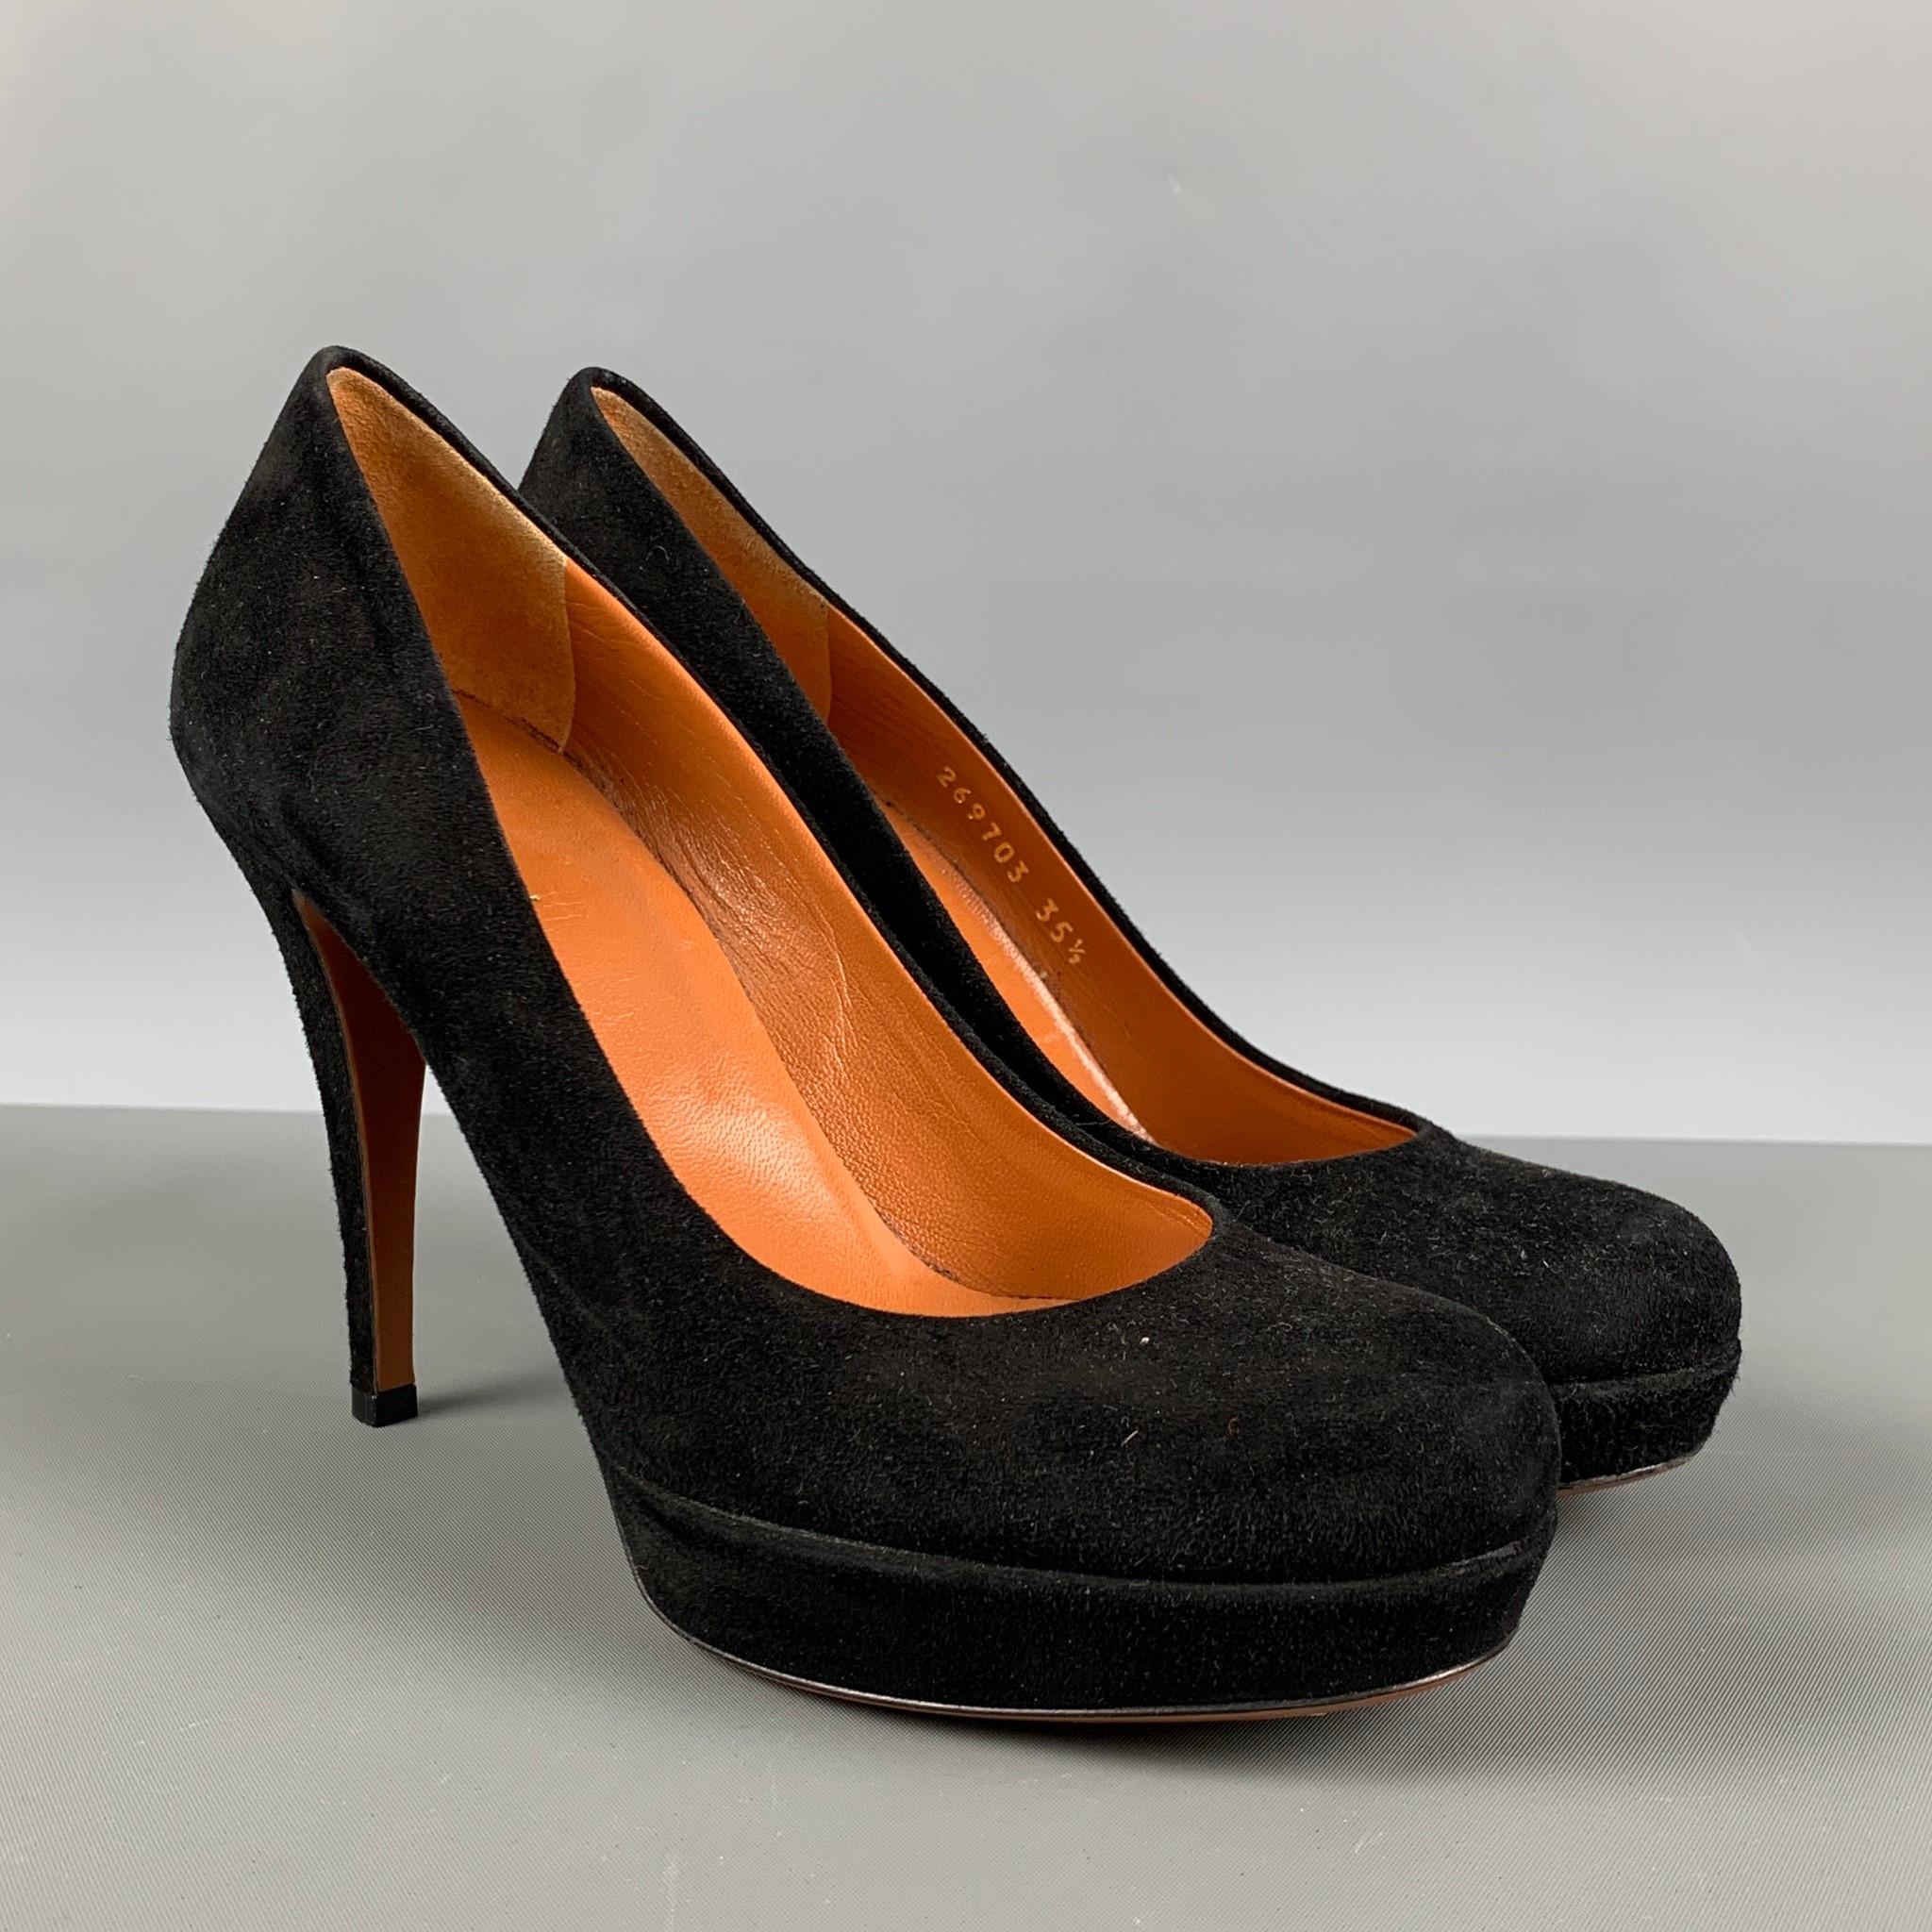 GUCCI pumps comes in a black suede leather featuring a platform style. Made in Italy.

Very Good Pre-Owned Condition.
Marked: 26 9703 35 1/2

Measurements:

Heel: 4.25 in.
Platform: 1 in.   

SKU: 124740
Category: Pumps

More Details
Brand: